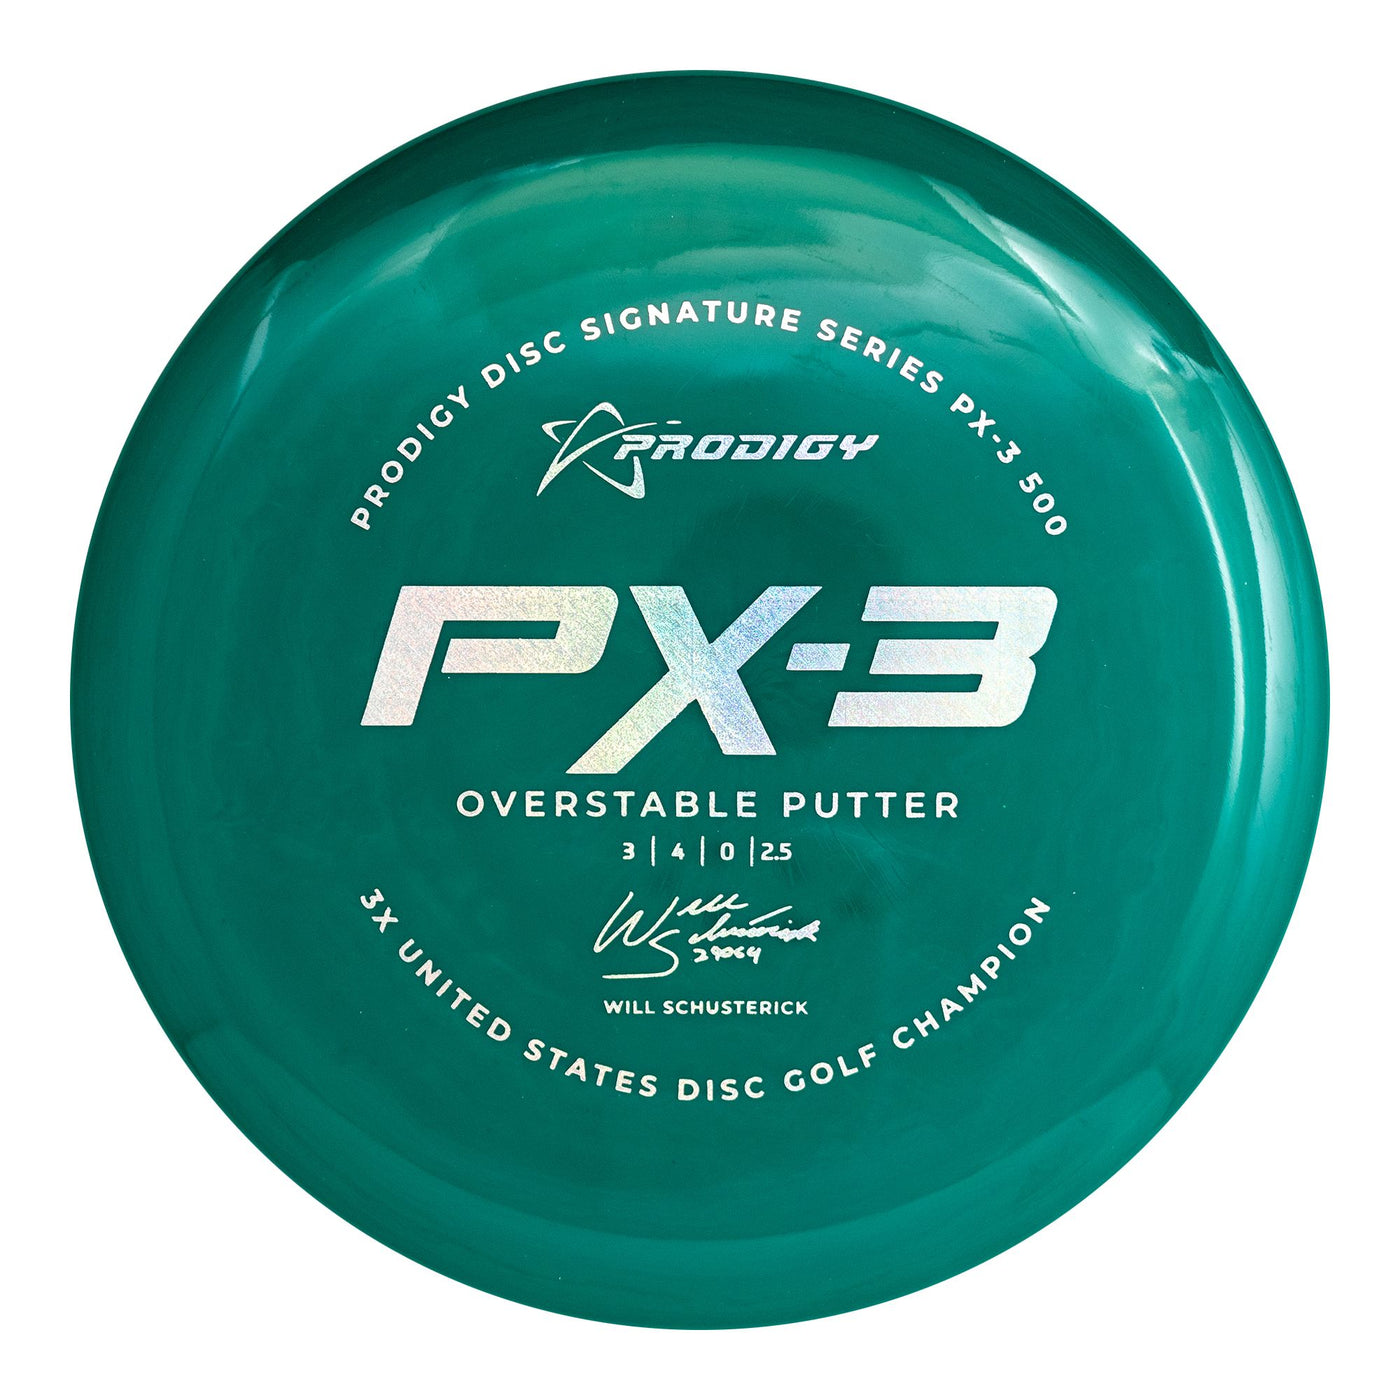 Prodigy 500 PX-3 Putter with 2022 Signature Series Will Schusterick - 3X United States Disc Golf Champion Stamp - Speed 4